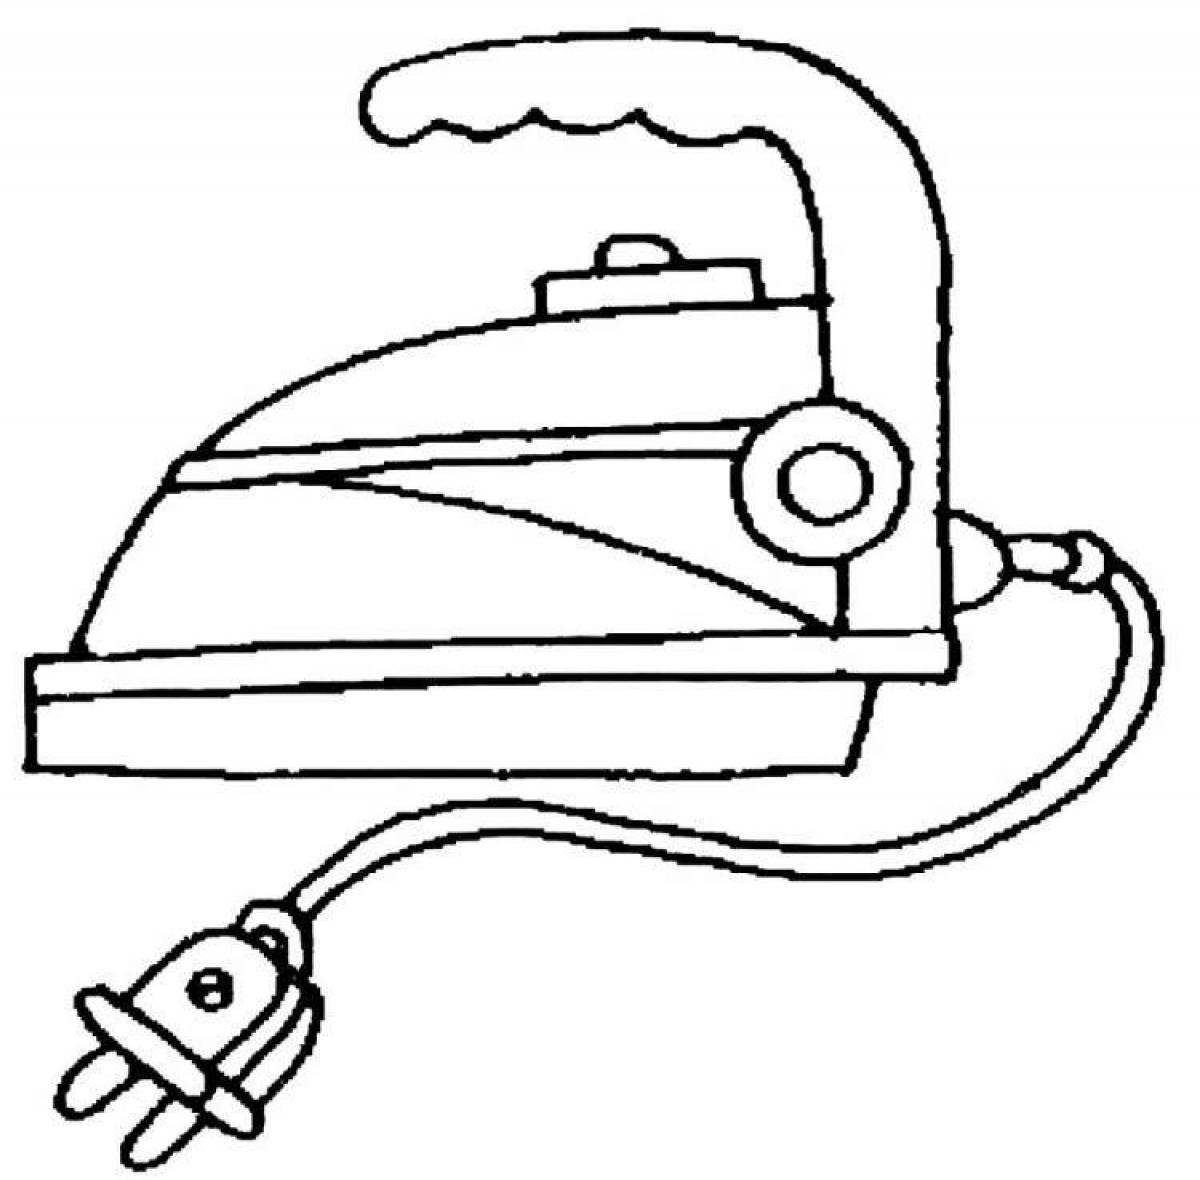 Coloring page of funny home appliances